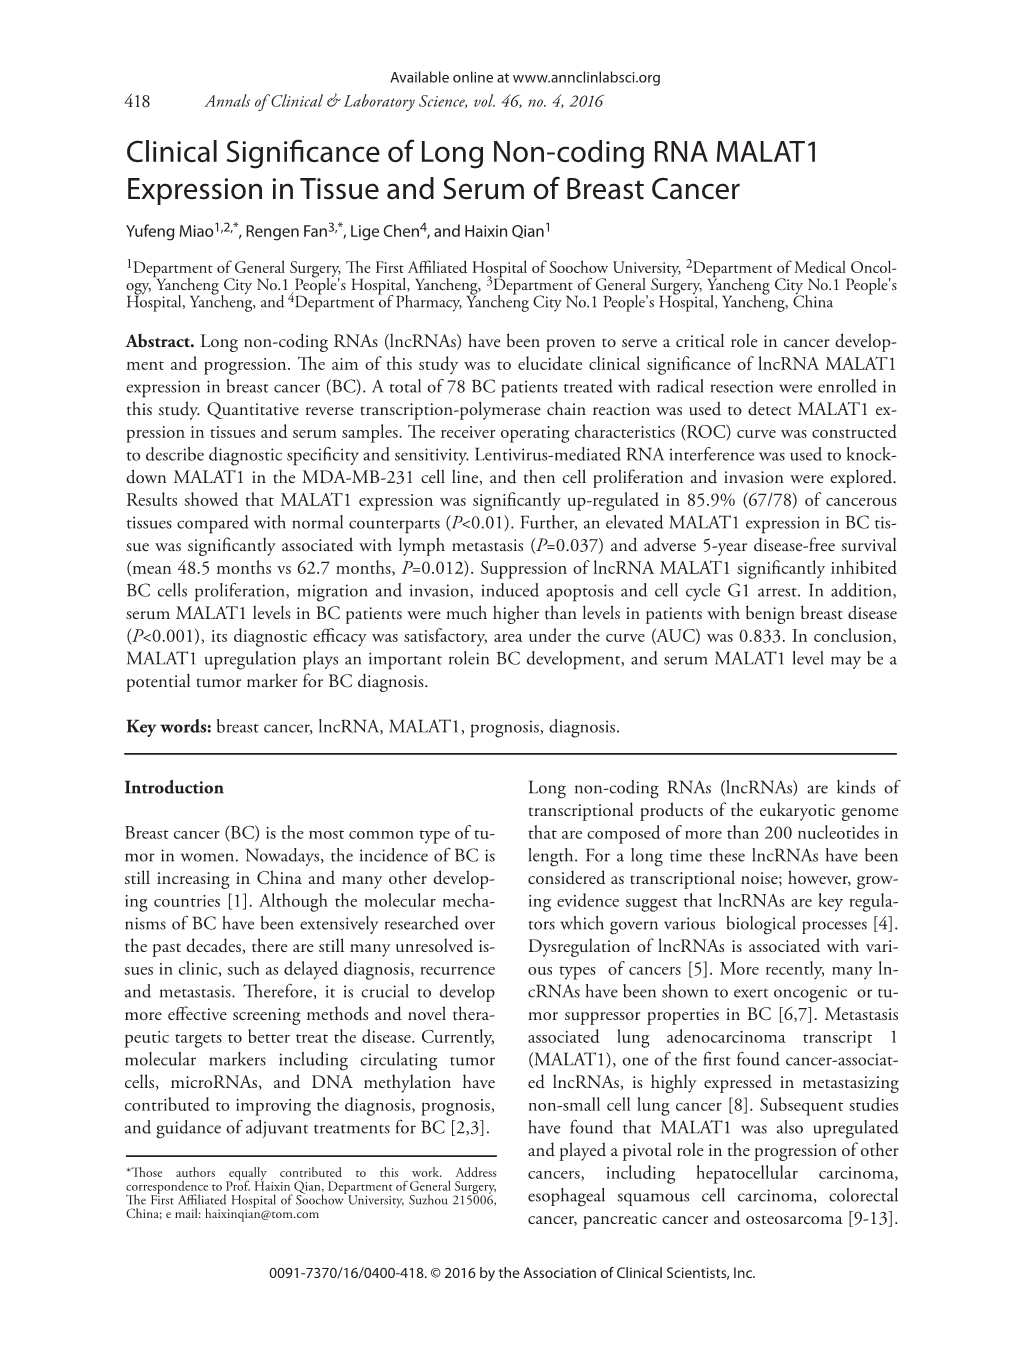 Clinical Significance of Long Non-Coding RNA MALAT1 Expression in Tissue and Serum of Breast Cancer